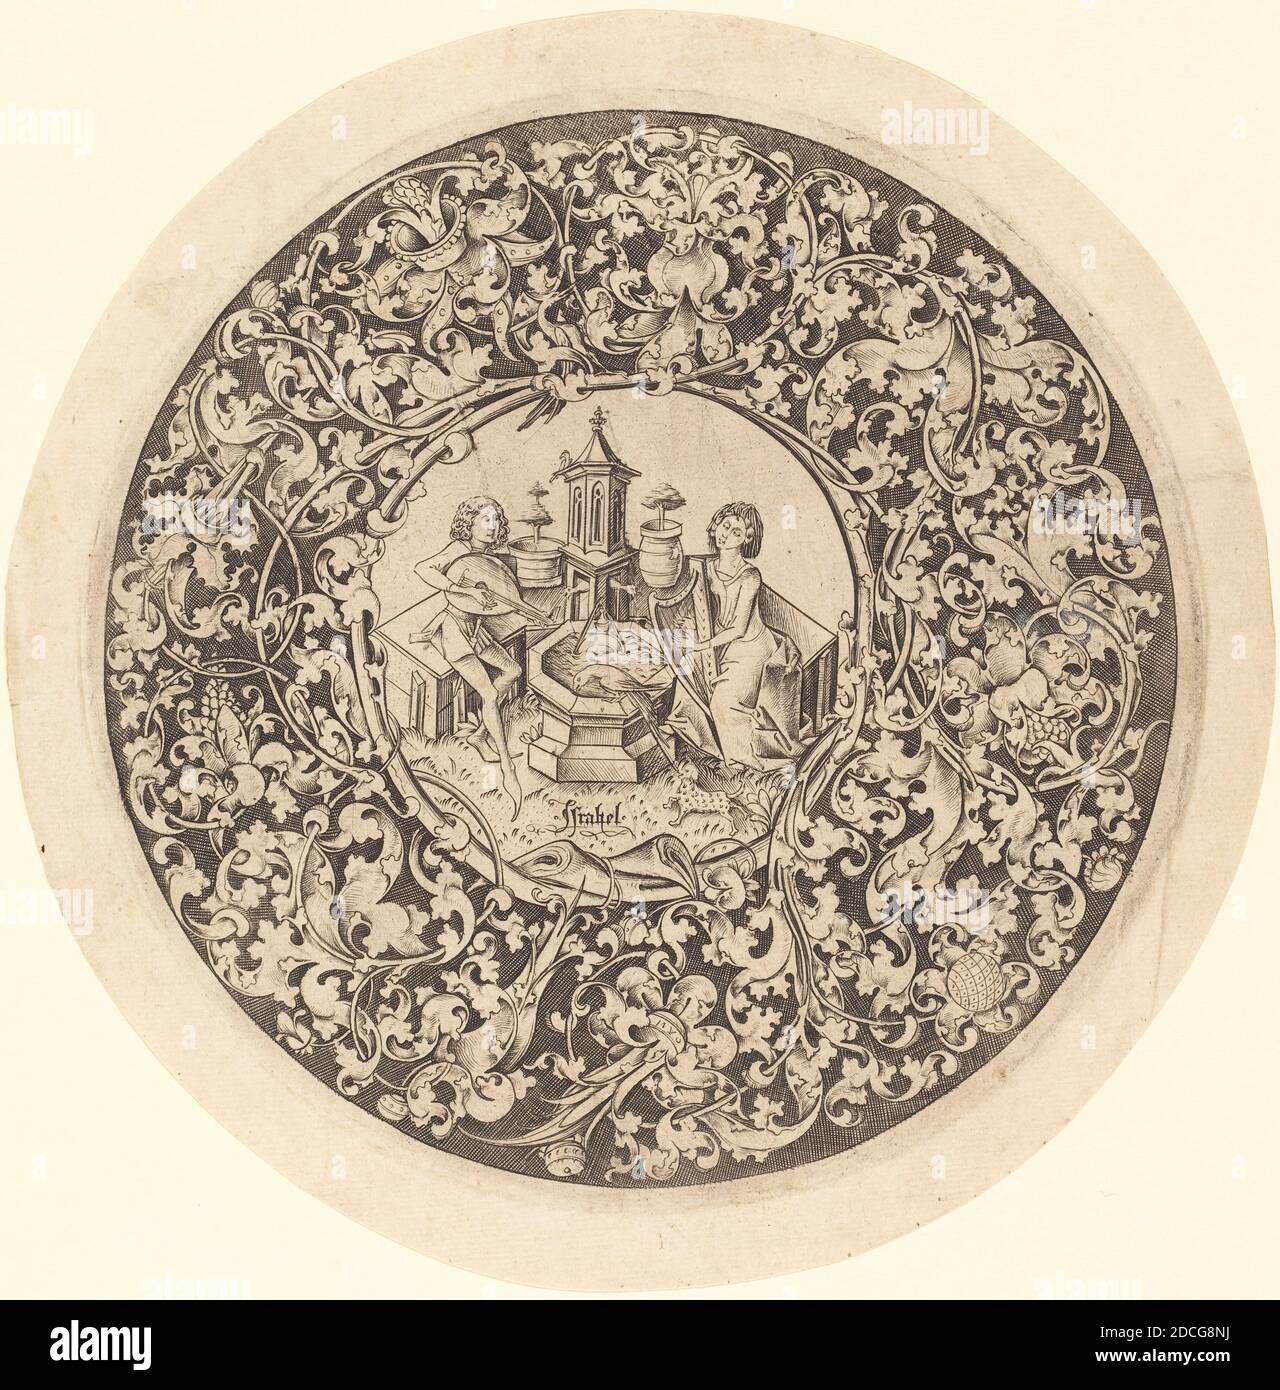 Israhel van Meckenem, (artist), German, c. 1445 - 1503, Circular Ornament with Musicians Playing near a Well, Scenes of Daily Life, (series), c. 1495/1503, engraving Stock Photo